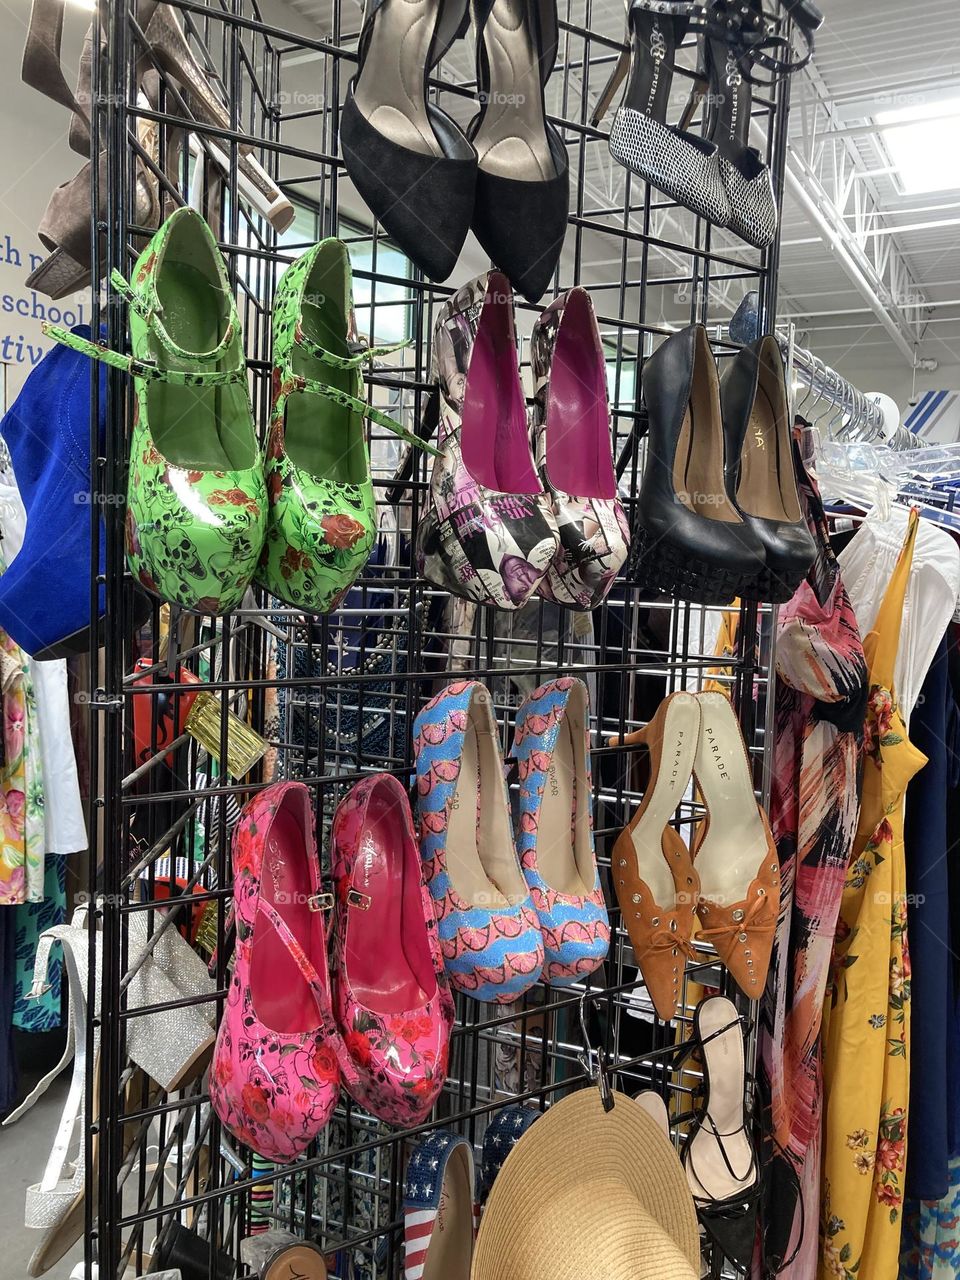 Shoes at Goodwill 